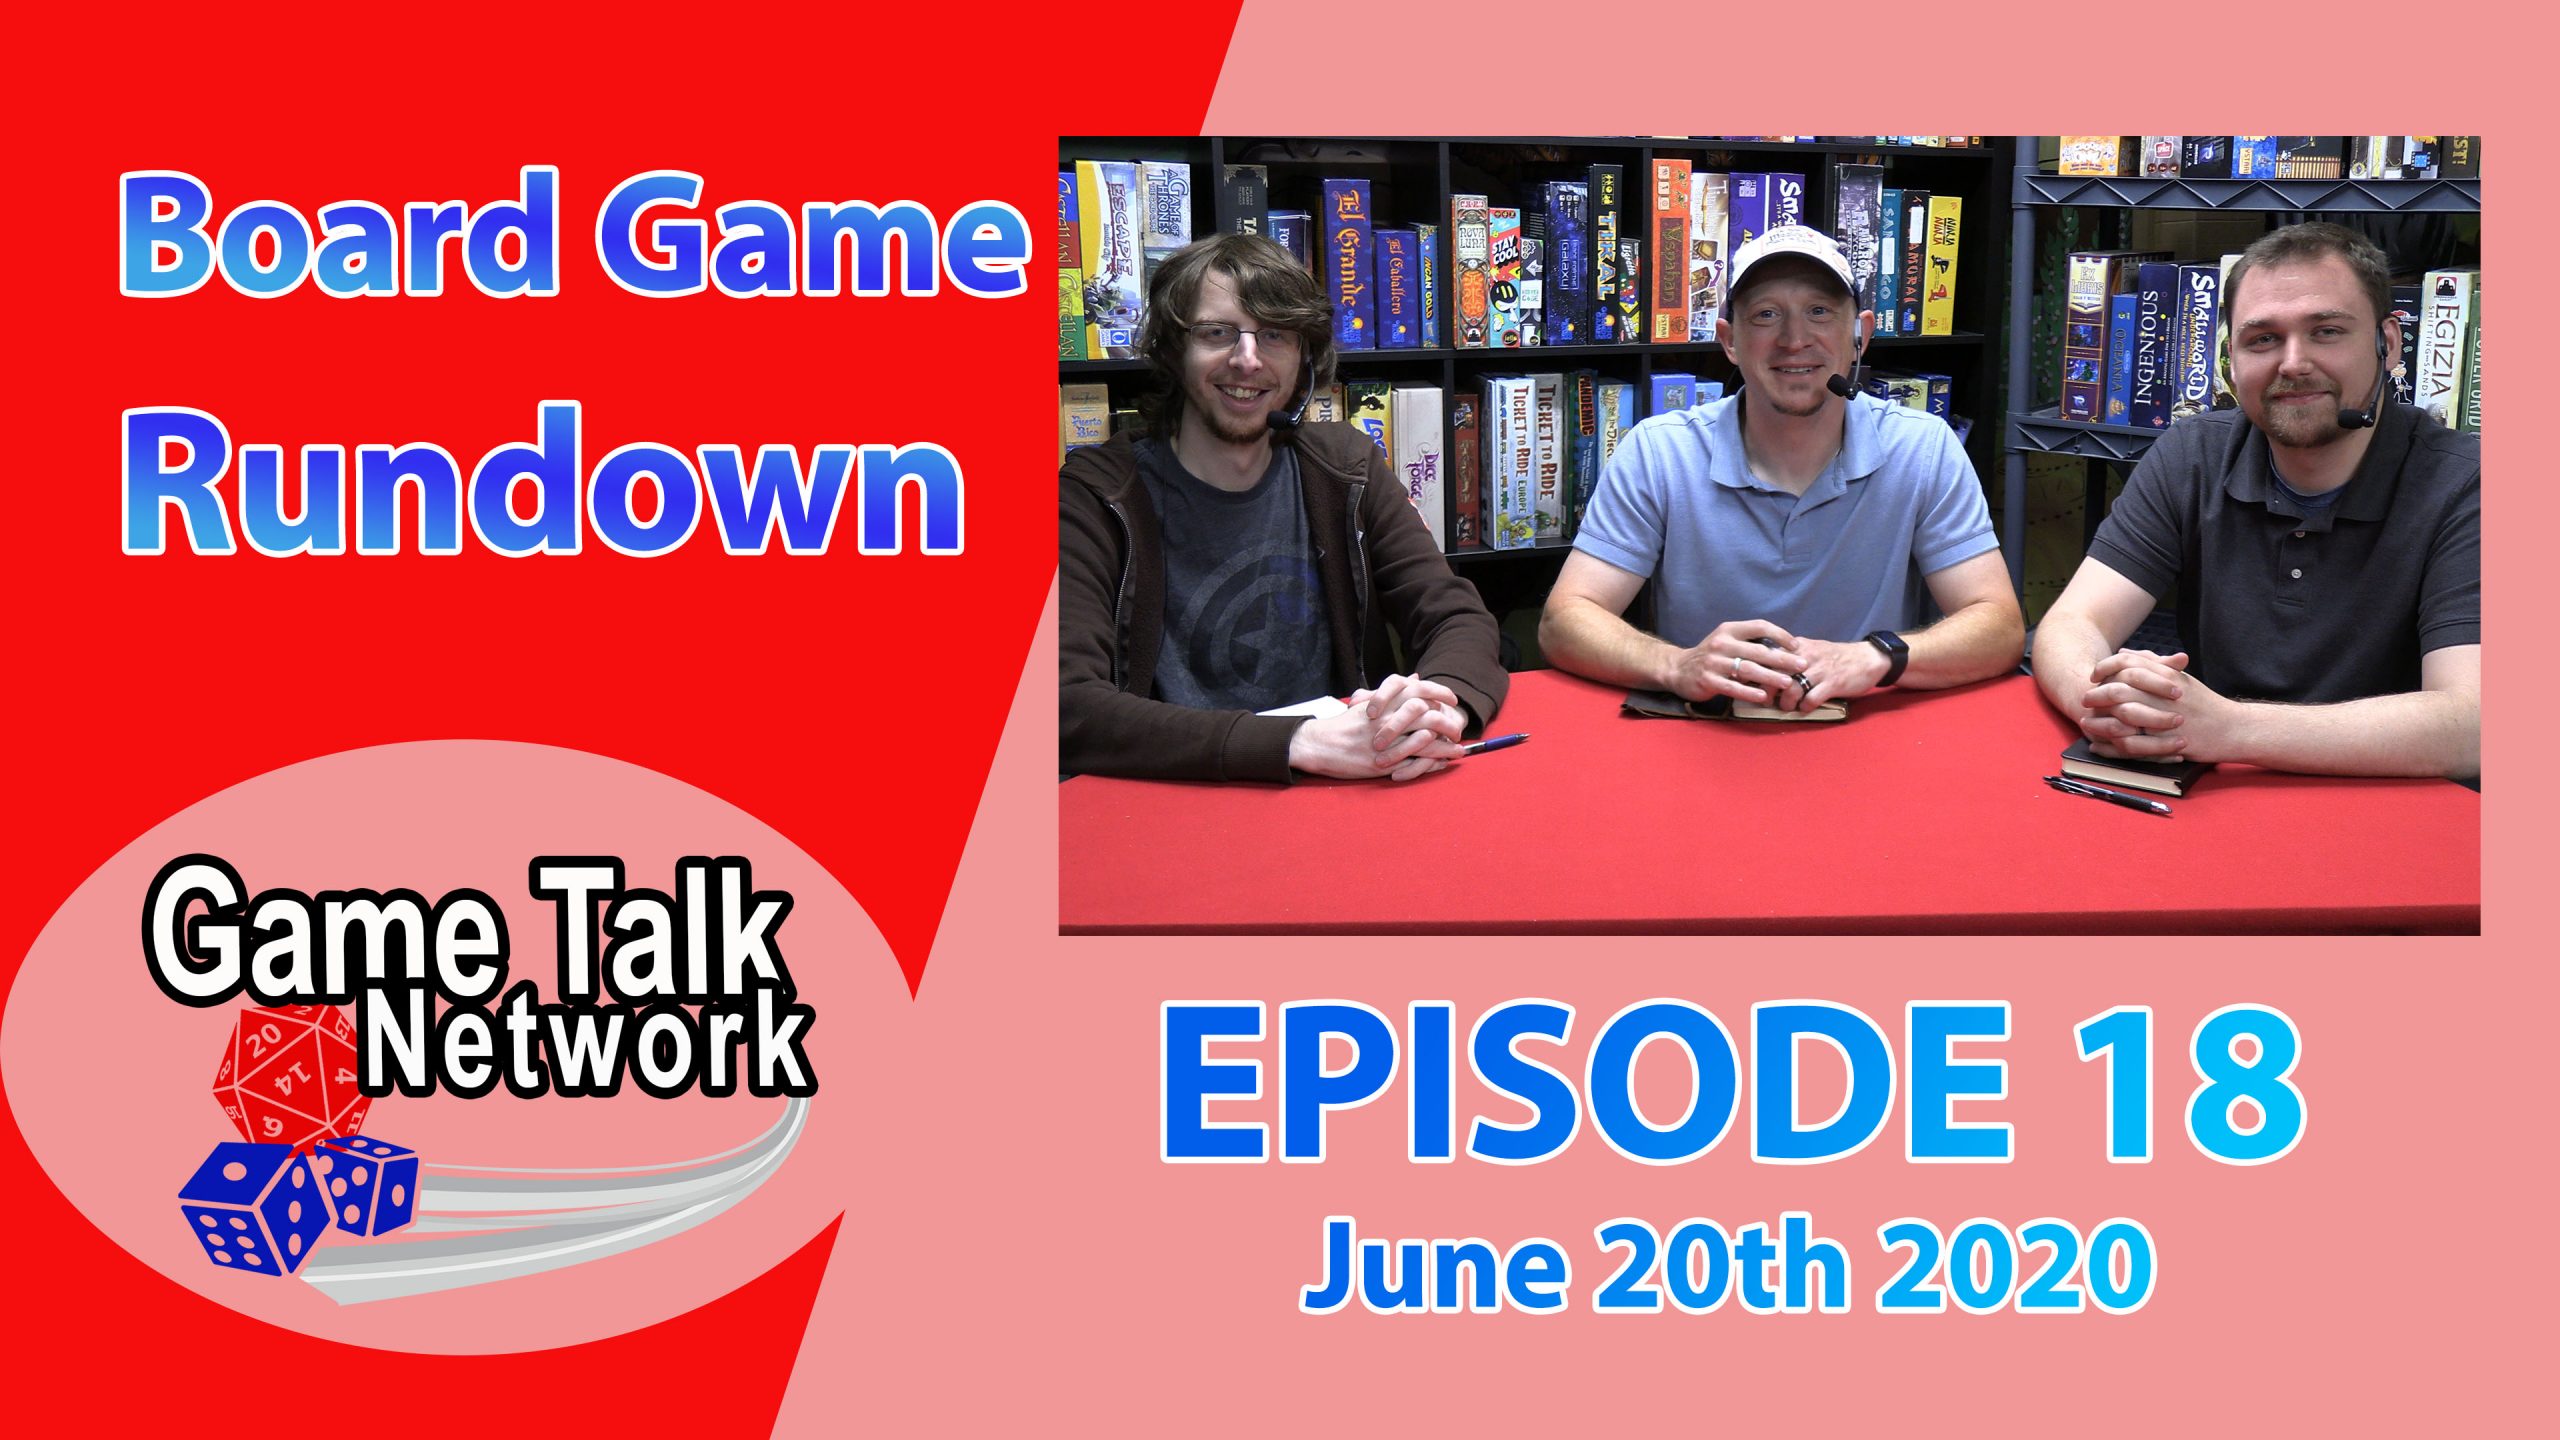 Board Game Rundown Episode 18: With Apologies to Sam